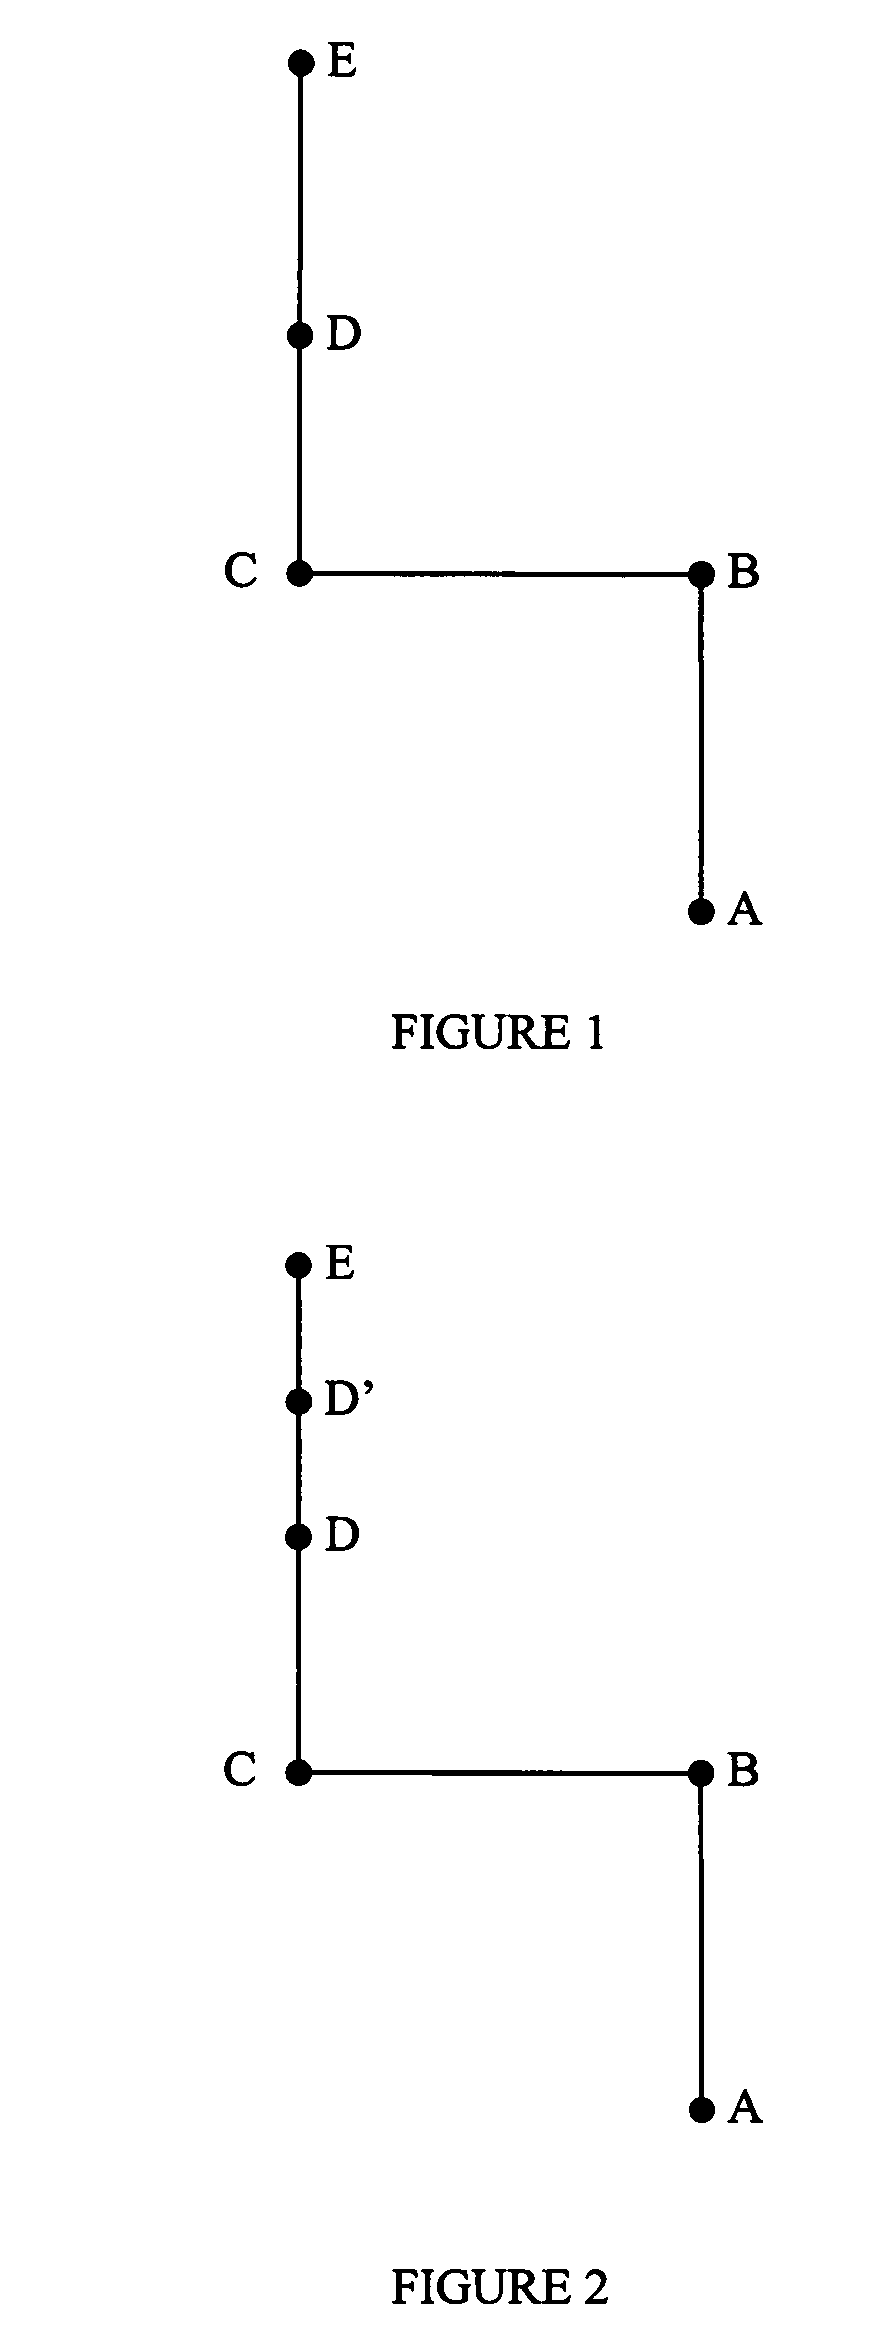 System and method of optimizing a fixed-route transit network